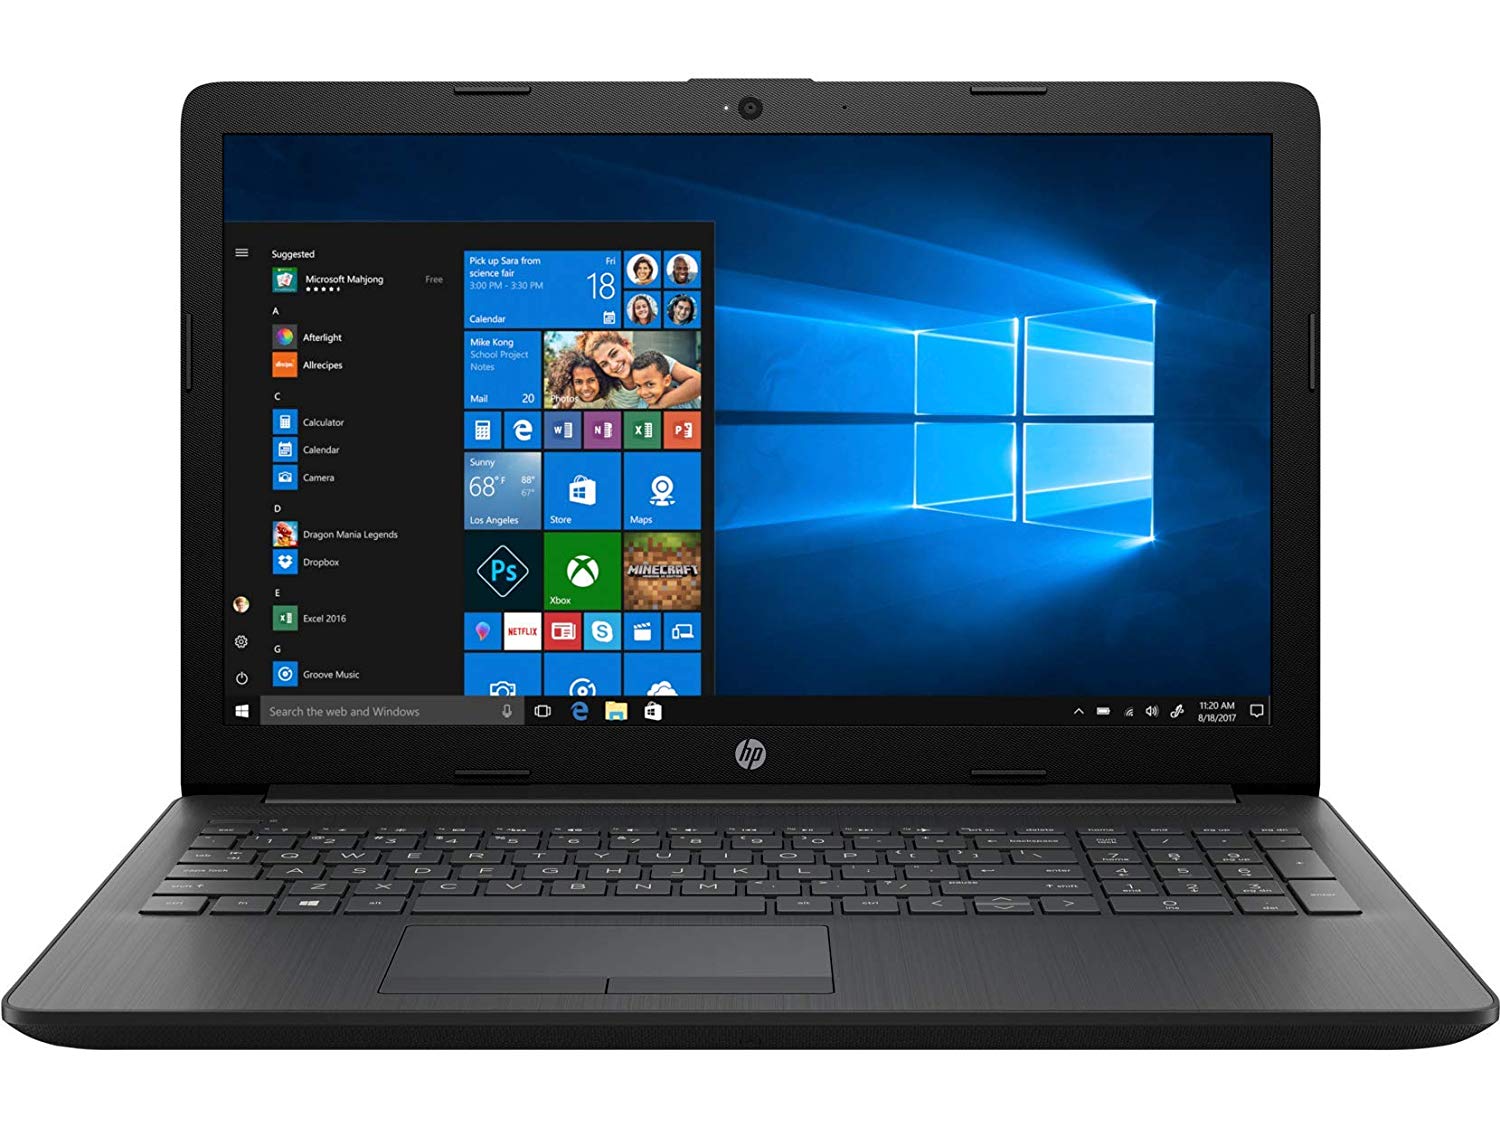 HP 15q-ds0006TU Intel Core i3 7th gen 15.6-inch FHD Laptop reviews and best buy price in India